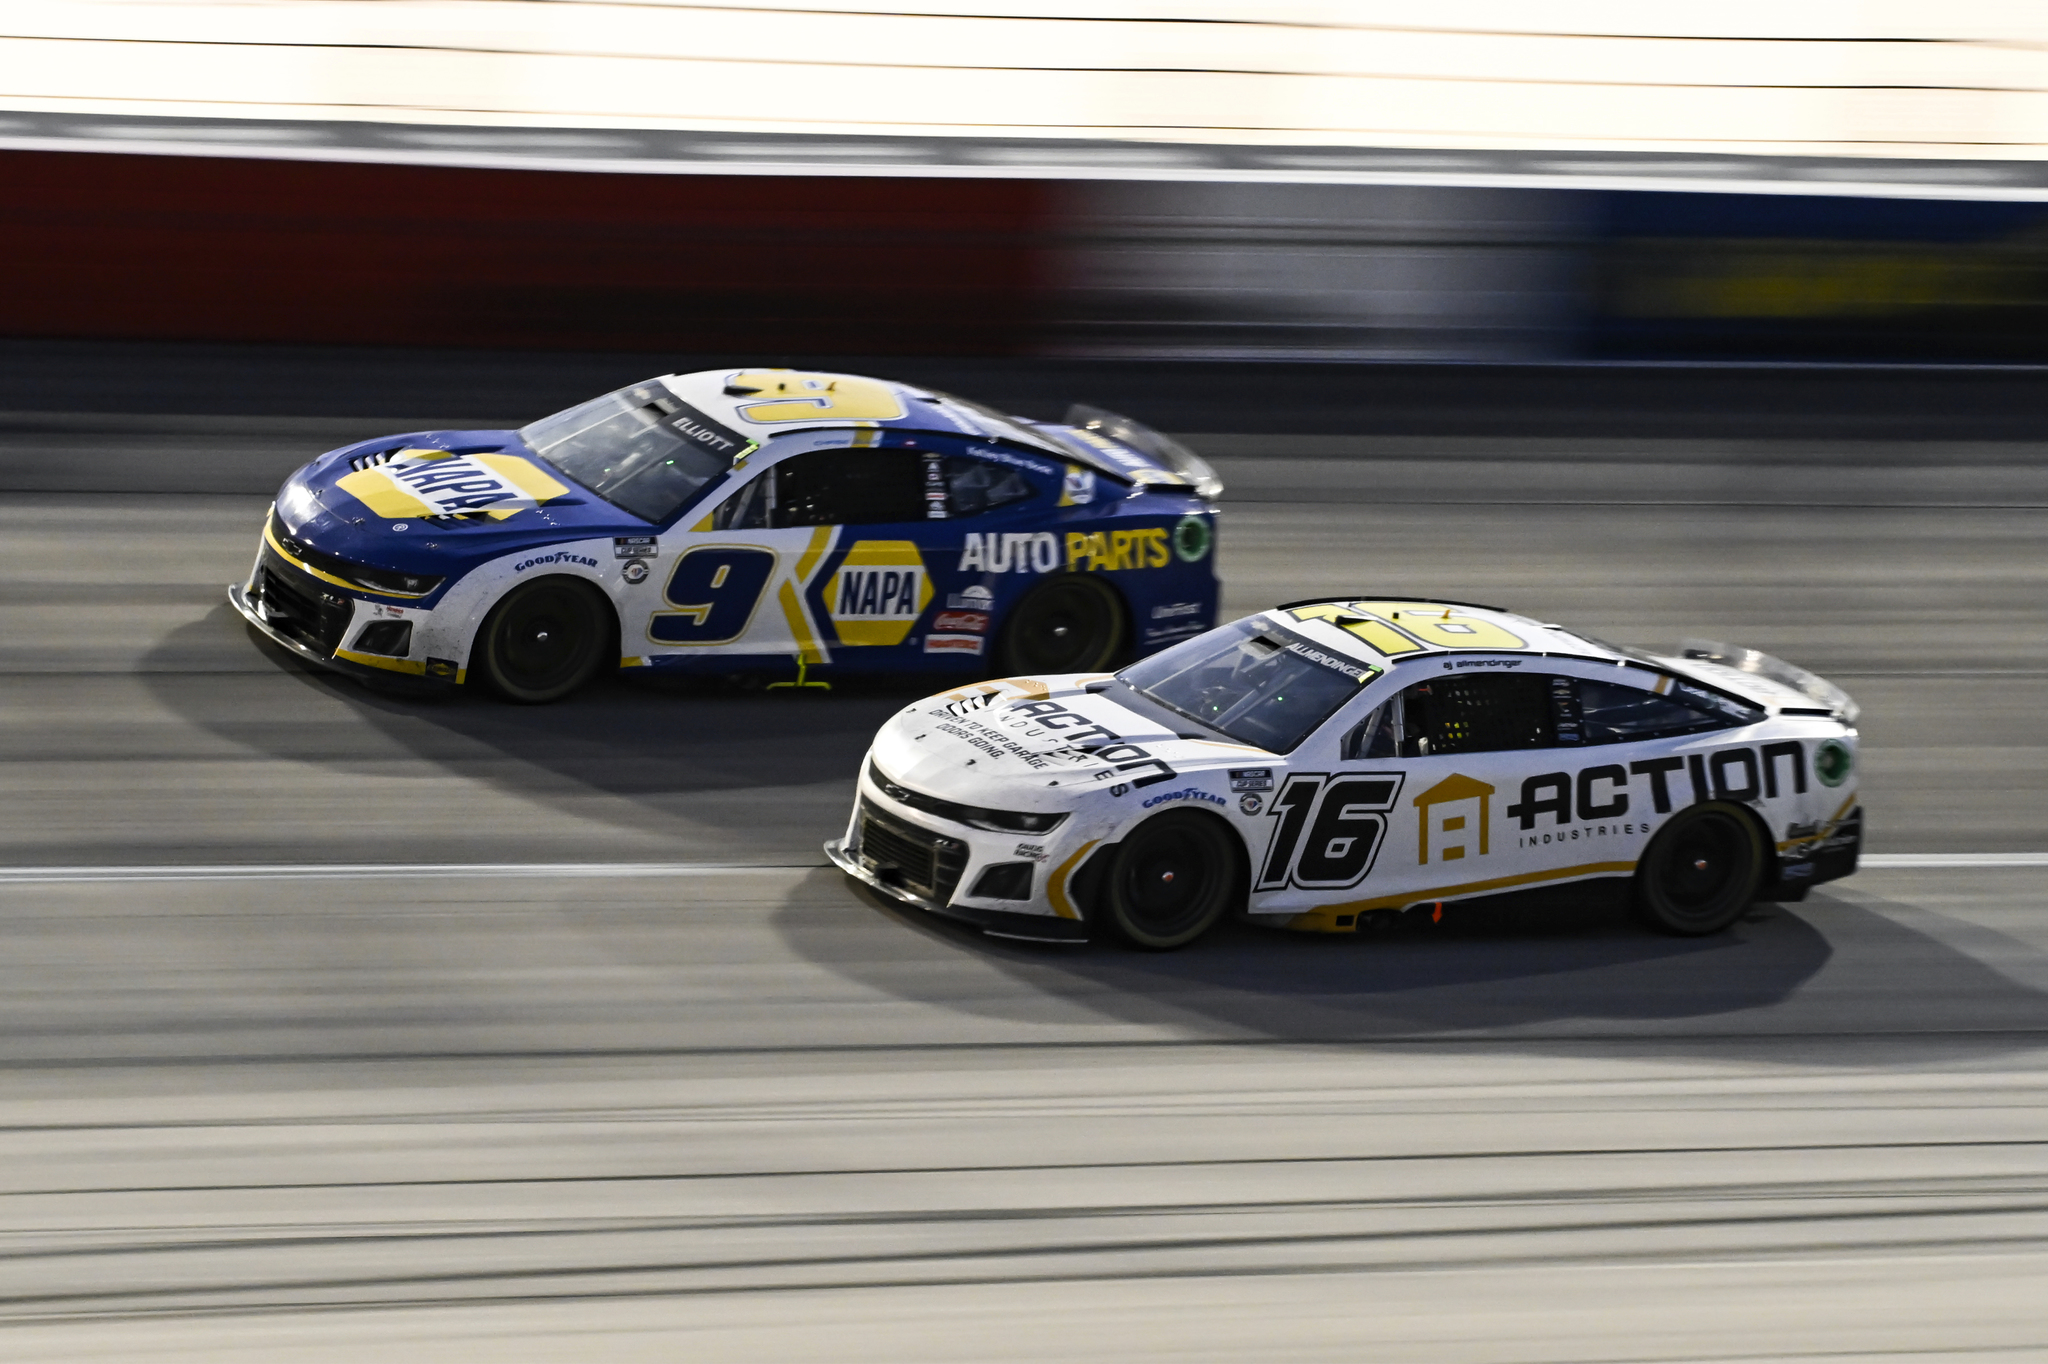 AJ Allmendinger (16) looks to pass Chase Elliott coming out of Turn 4 during a NASCAR Cup Series auto race at Darlington Raceway